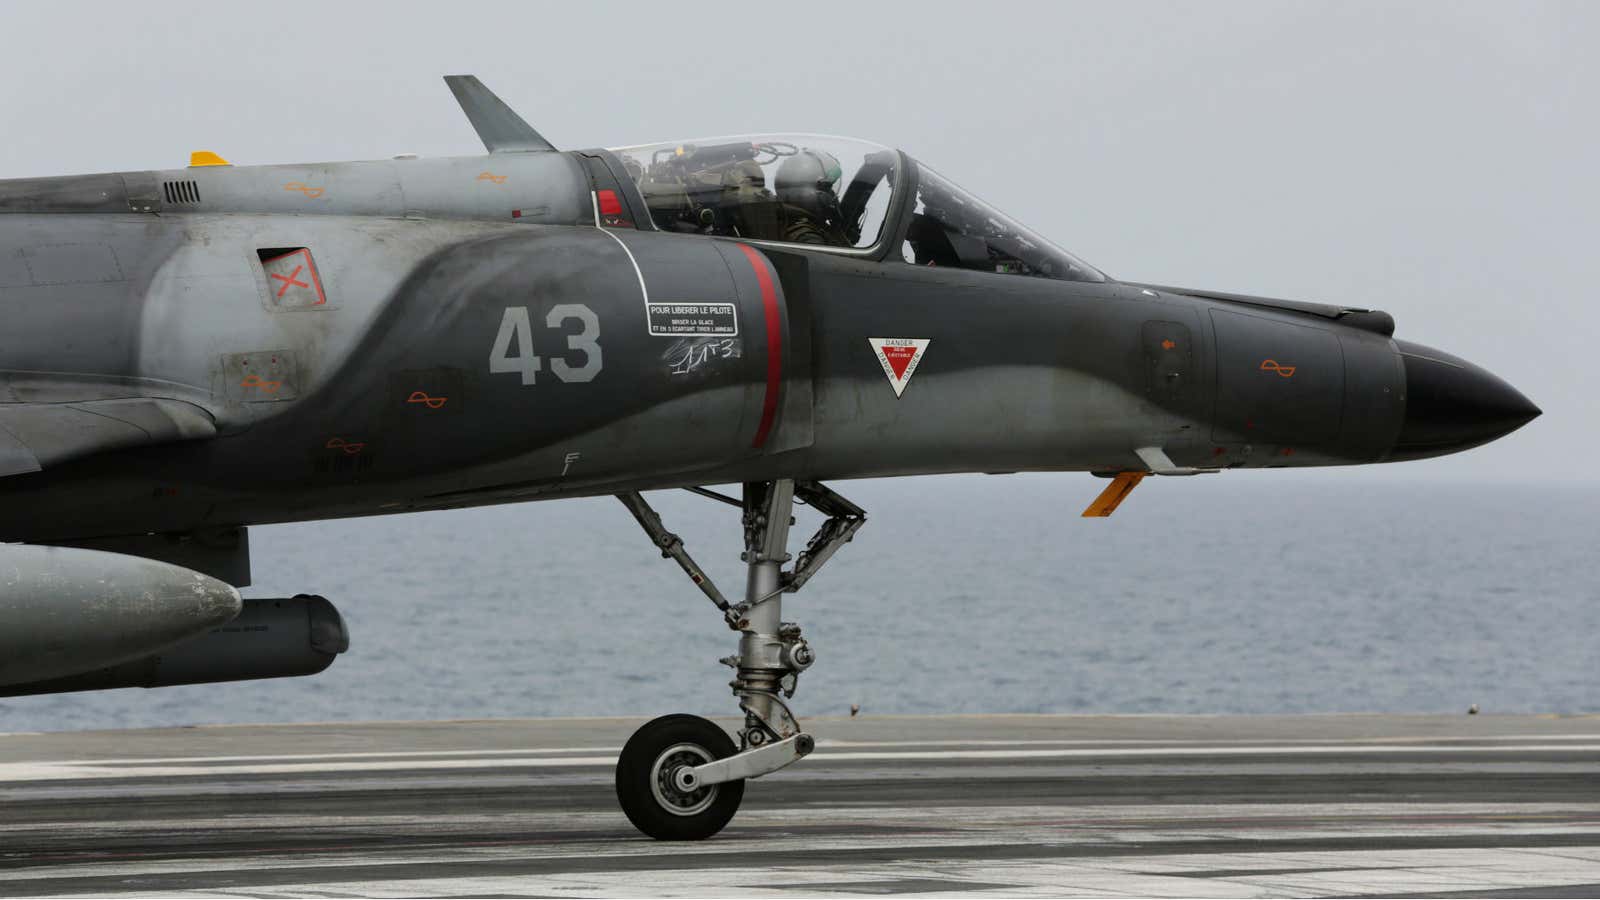 A French military plane lands on the French navy aircraft carrier Charles de Gaulle in the Persian Gulf in March 2015.